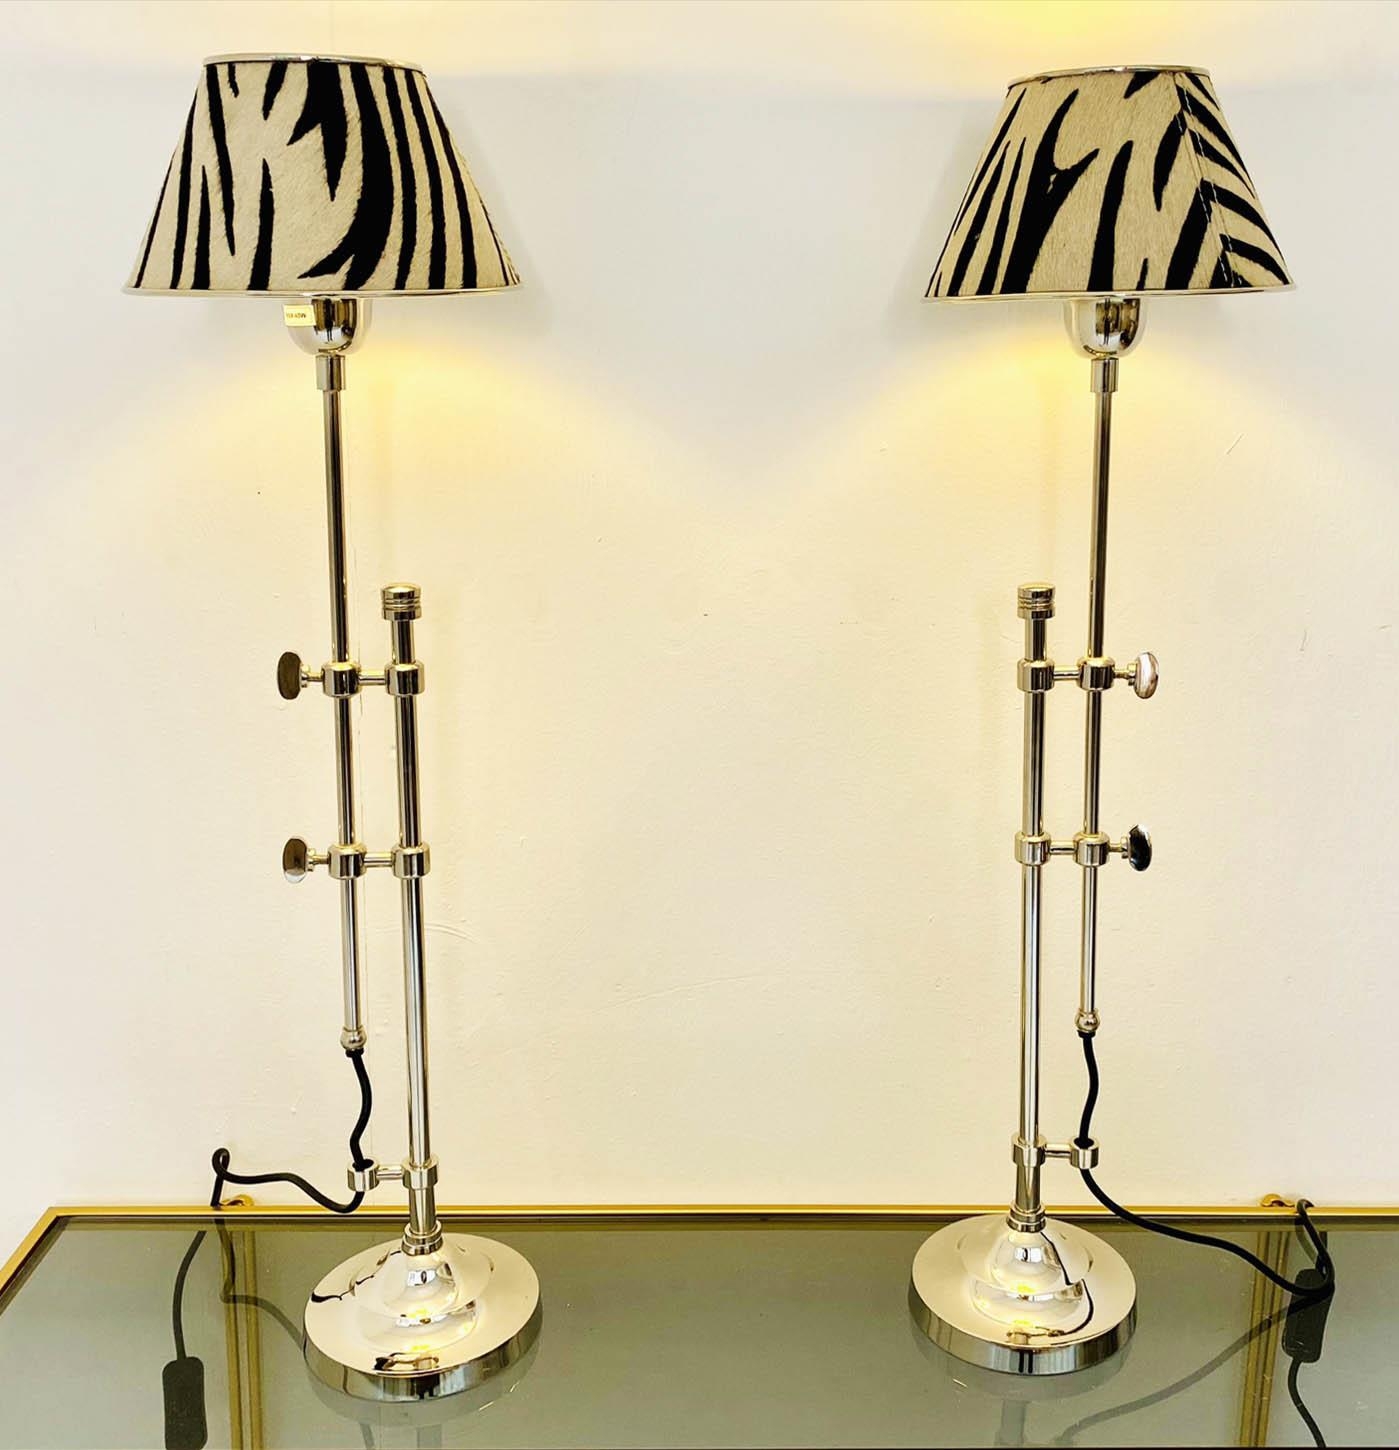 LIBRARY TABLE LAMPS, a pair, height adjustable, faux zebra hide shades, 68cm x 20cm x 20cm.